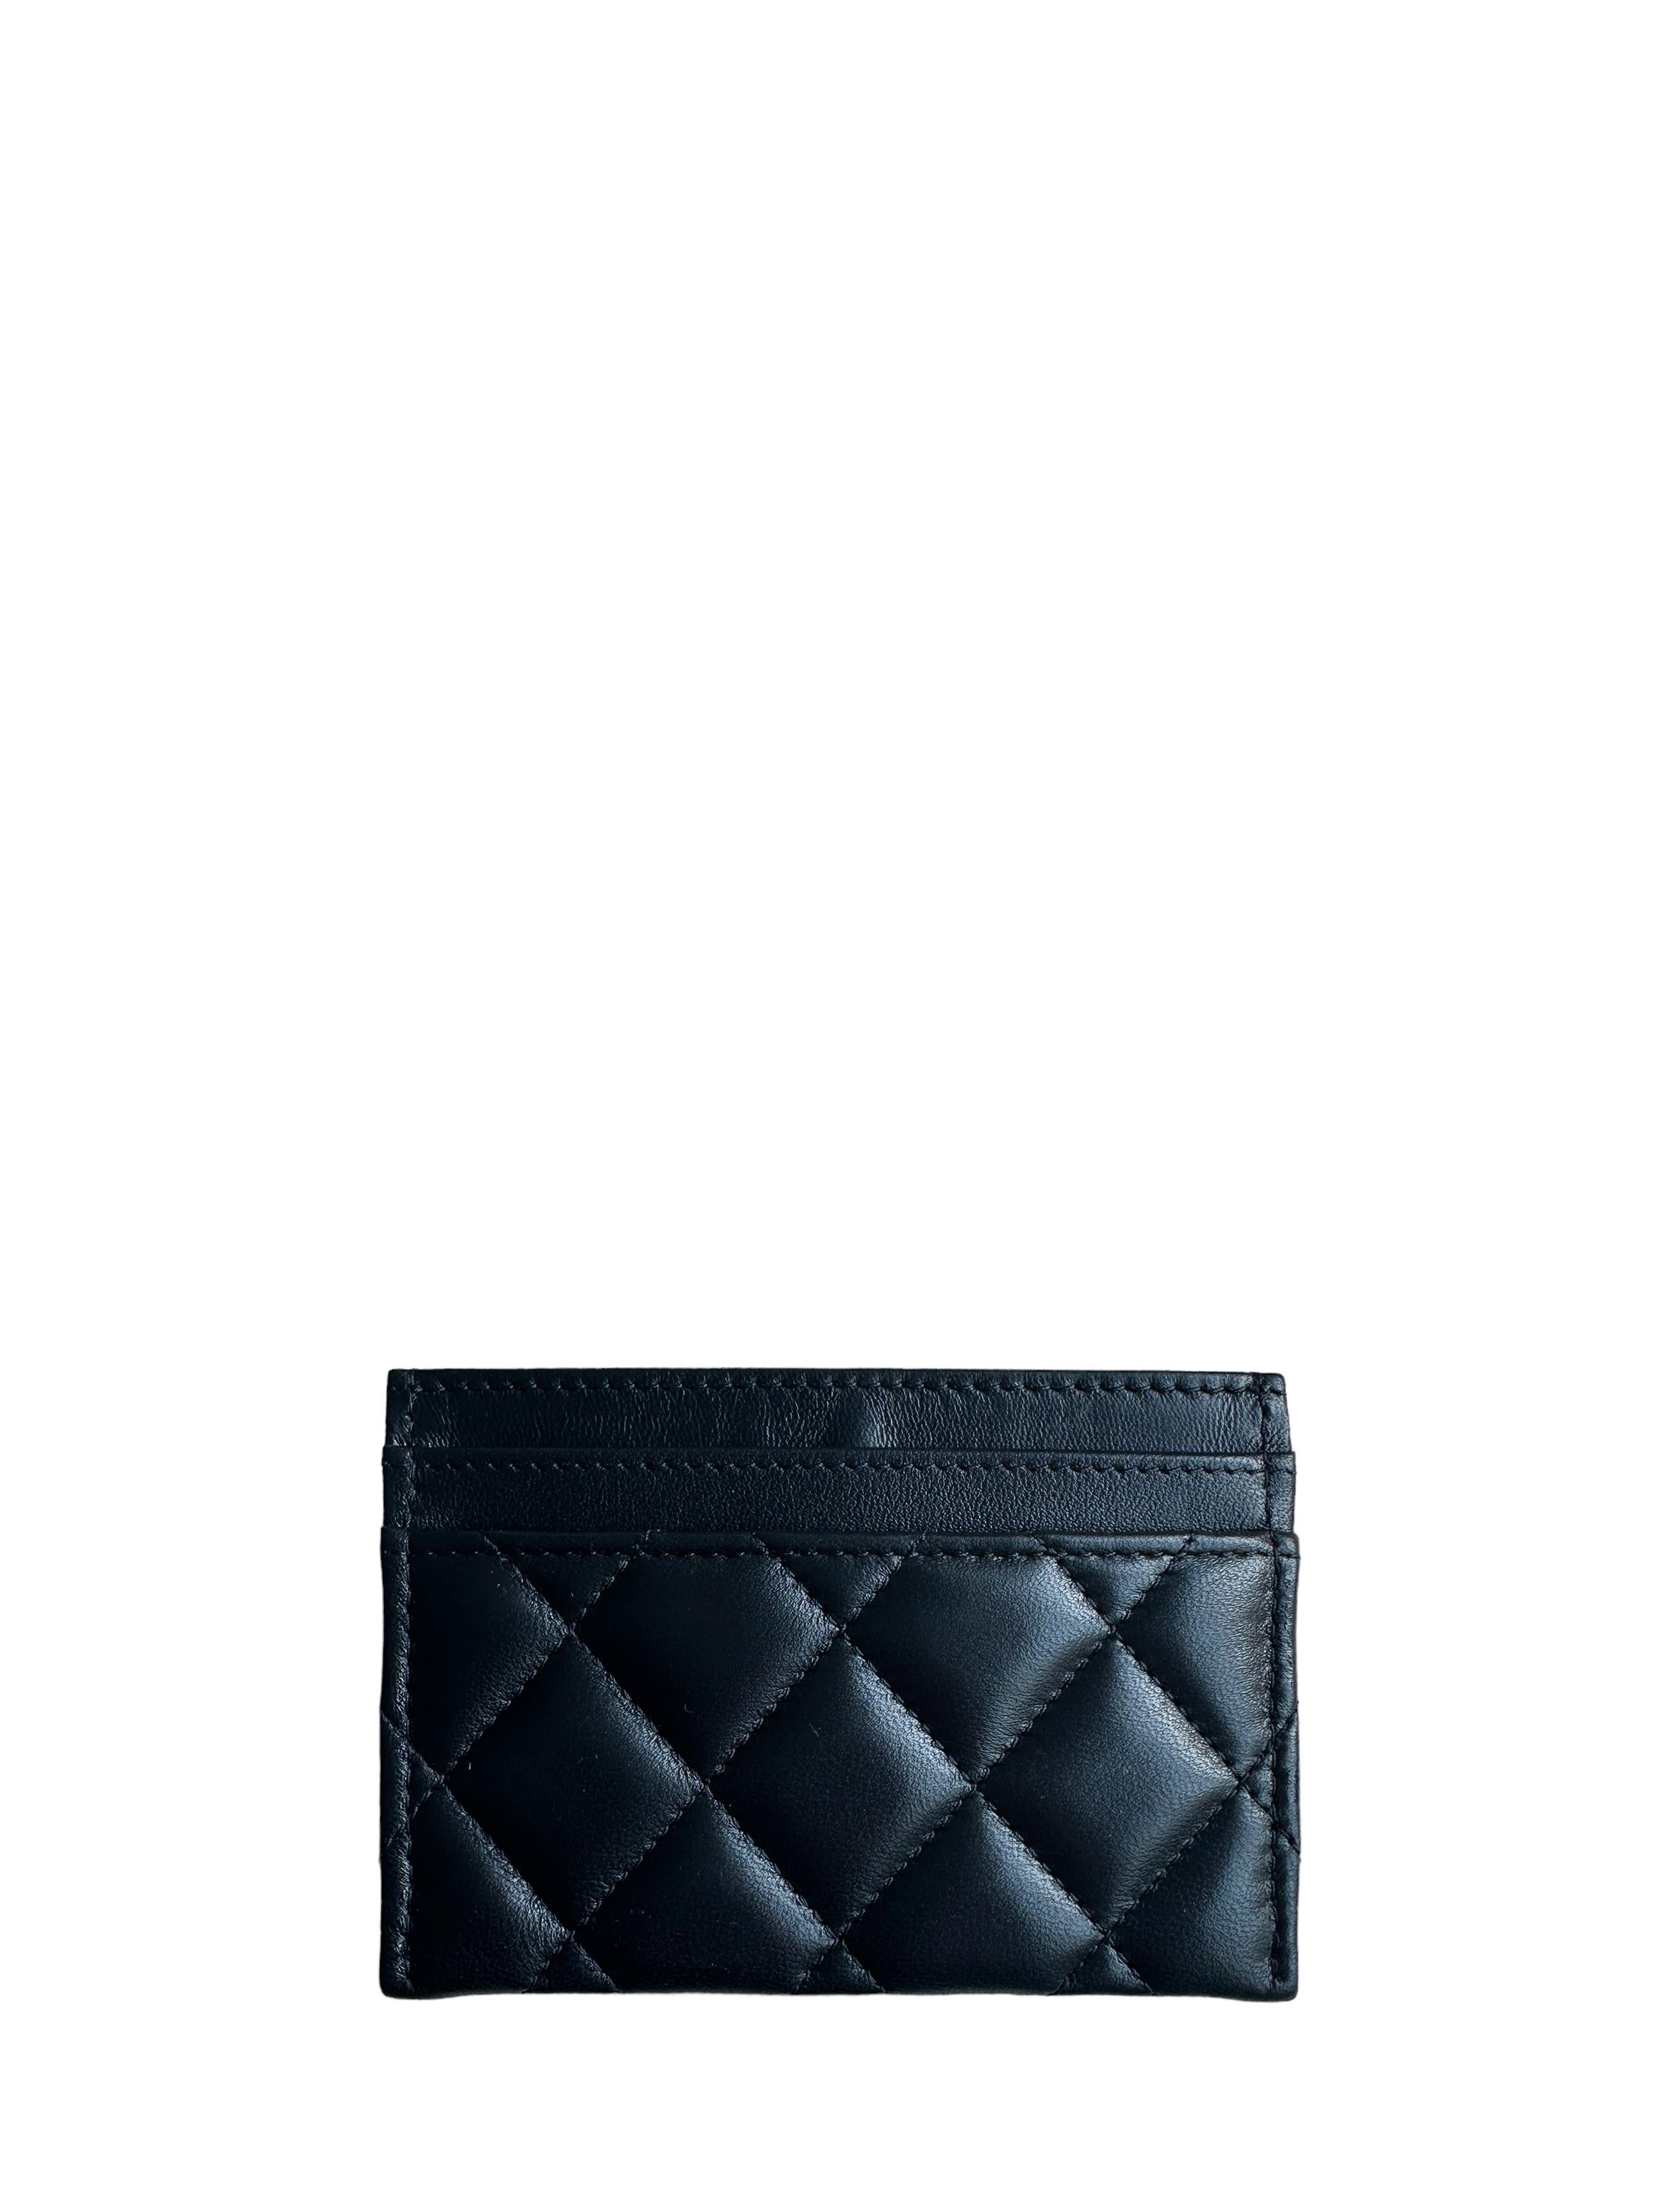 Chanel Black Leather Quilted CC Card Holder

Made In: Spain
Color: Black
Hardware: Goldtone
Materials: Lambskin leather
Lining: Leather and grosgrain
Four credit card slots
Exterior Condition: Like new
Interior Condition: Like new
Includes: Box and